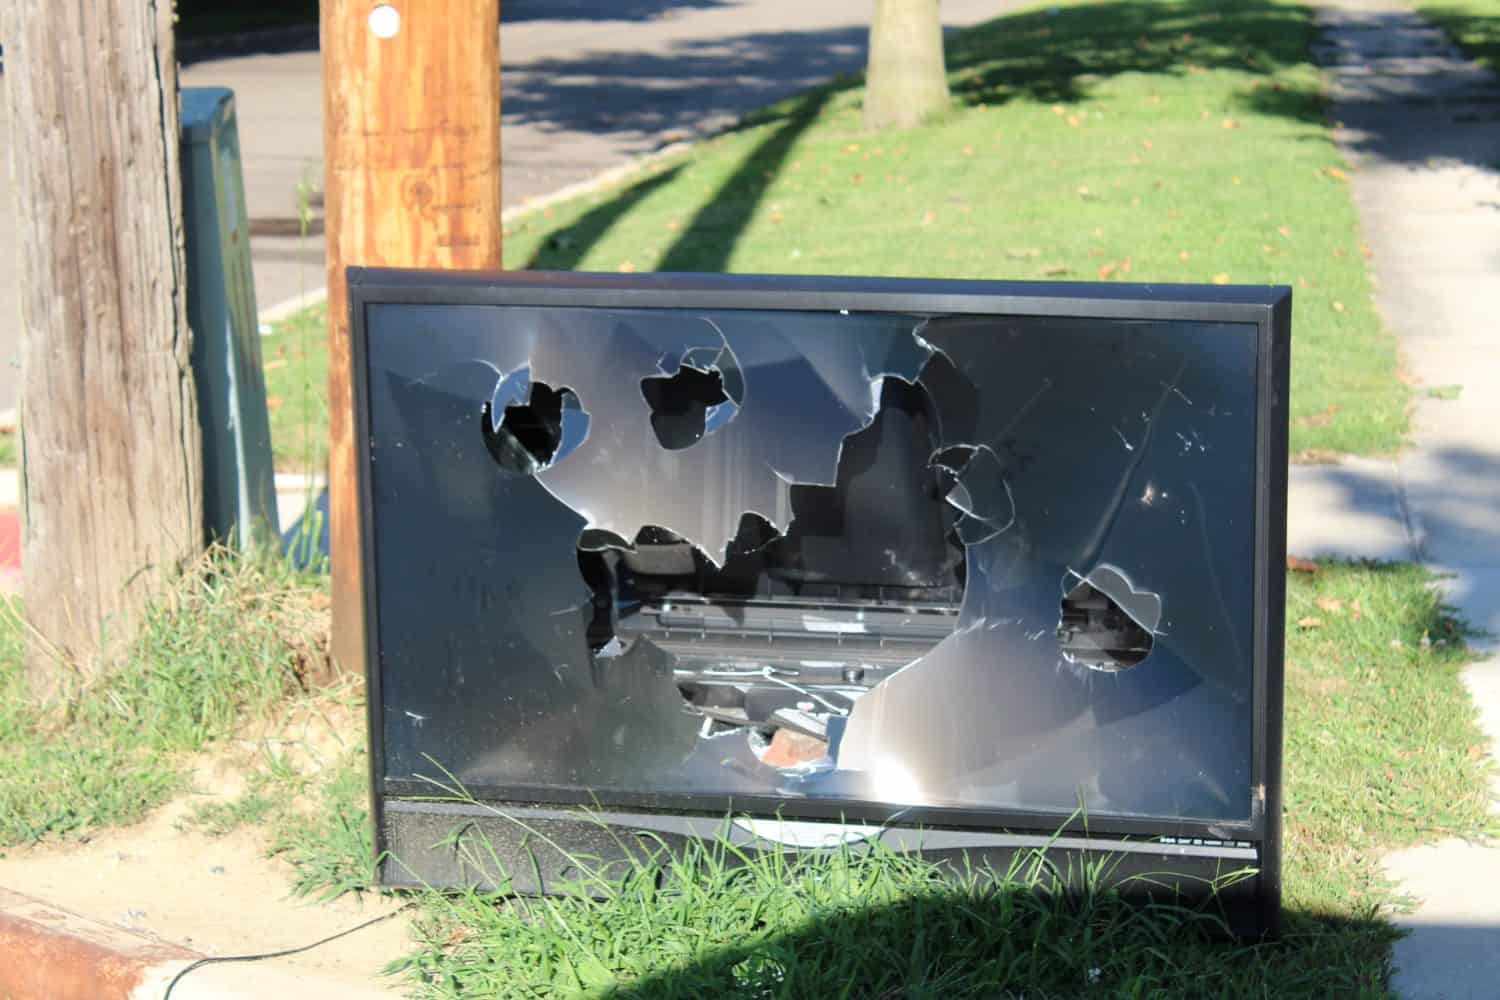 A discarded flat-screen television with a busted screen sits on a curb